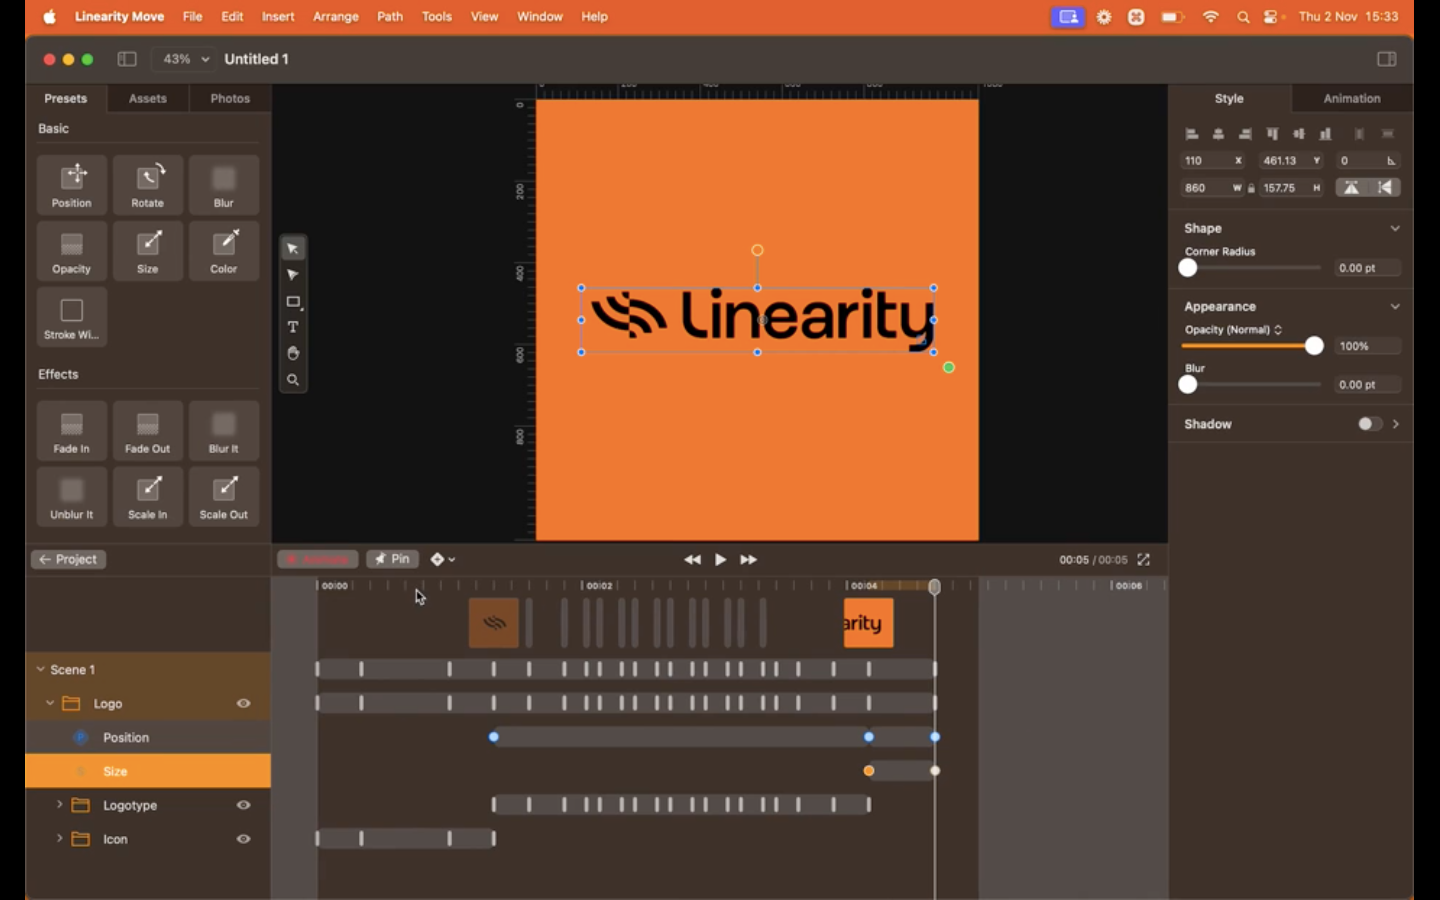 How to animate a logo + linearity + zoom out